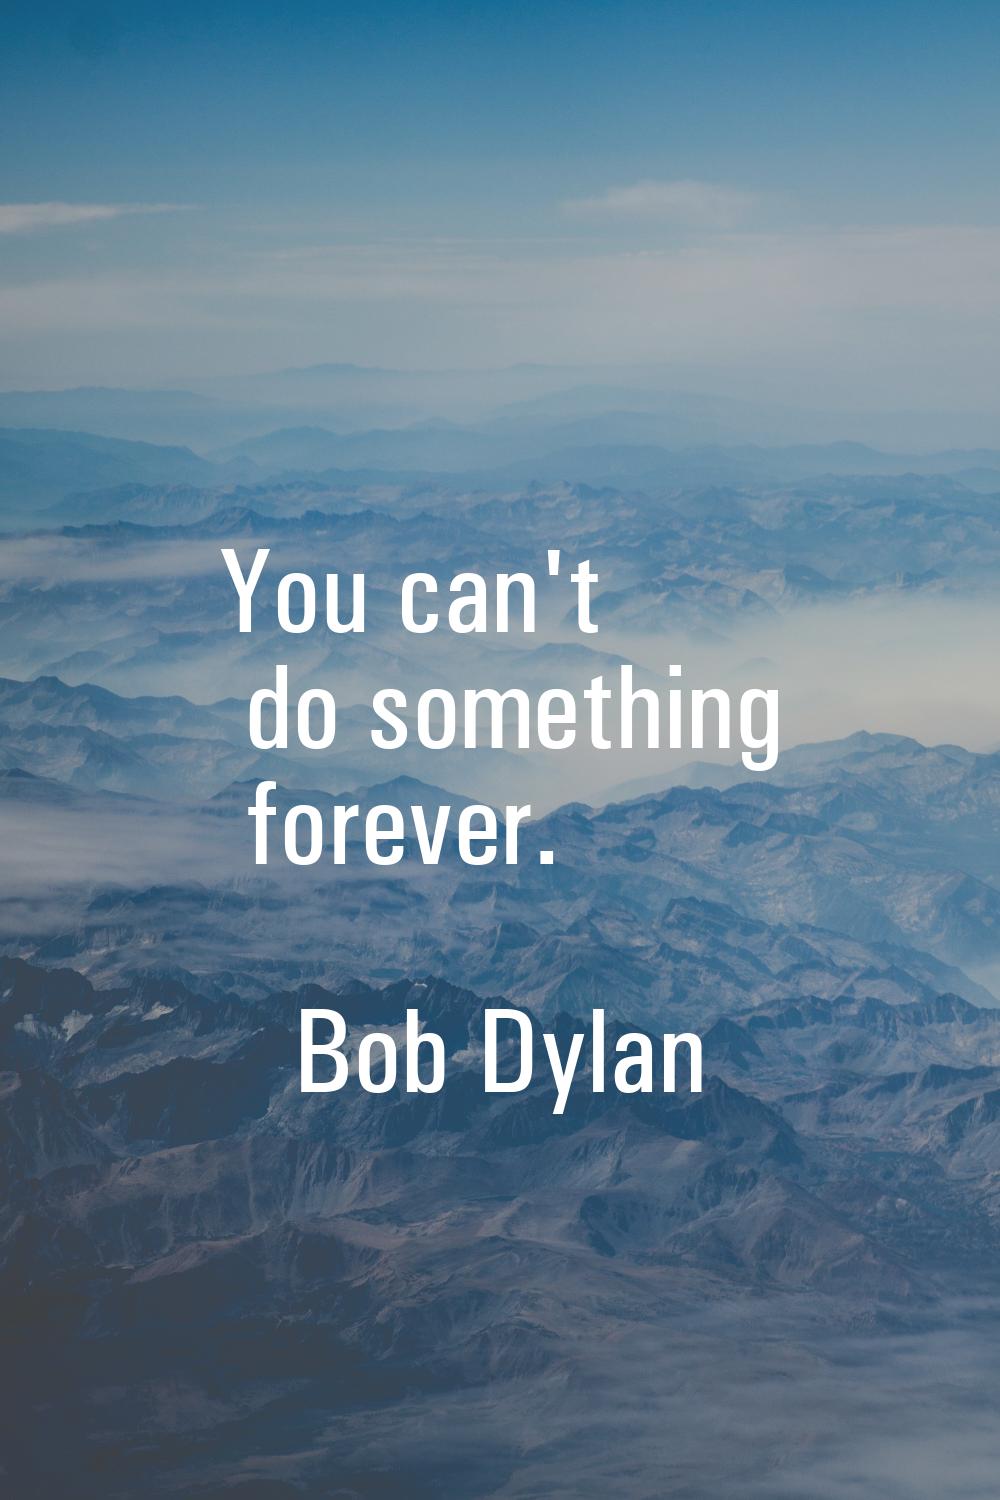 You can't do something forever.